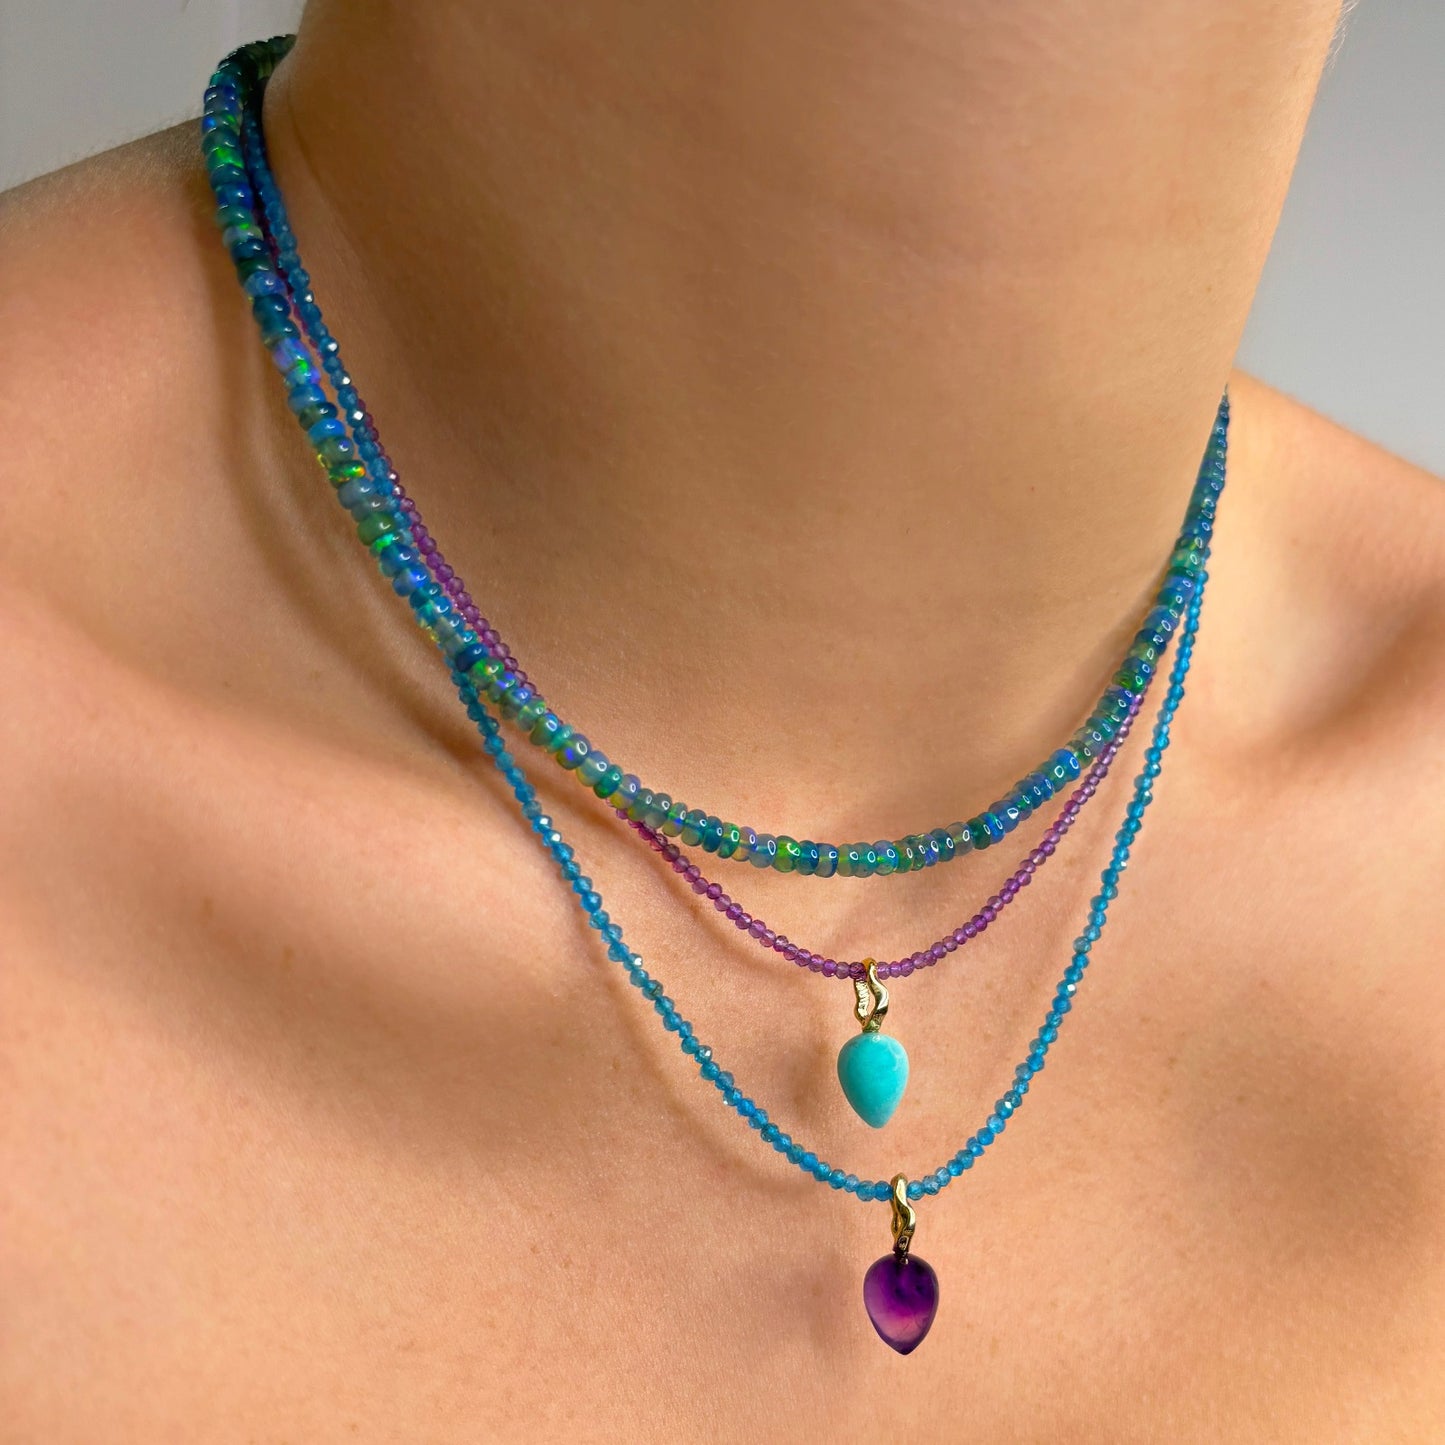 Two shimmering beaded necklaces made of 2mm faceted opals in shades of purple and bright blight blue. Styled on a neck layered with two acorn drop charms.